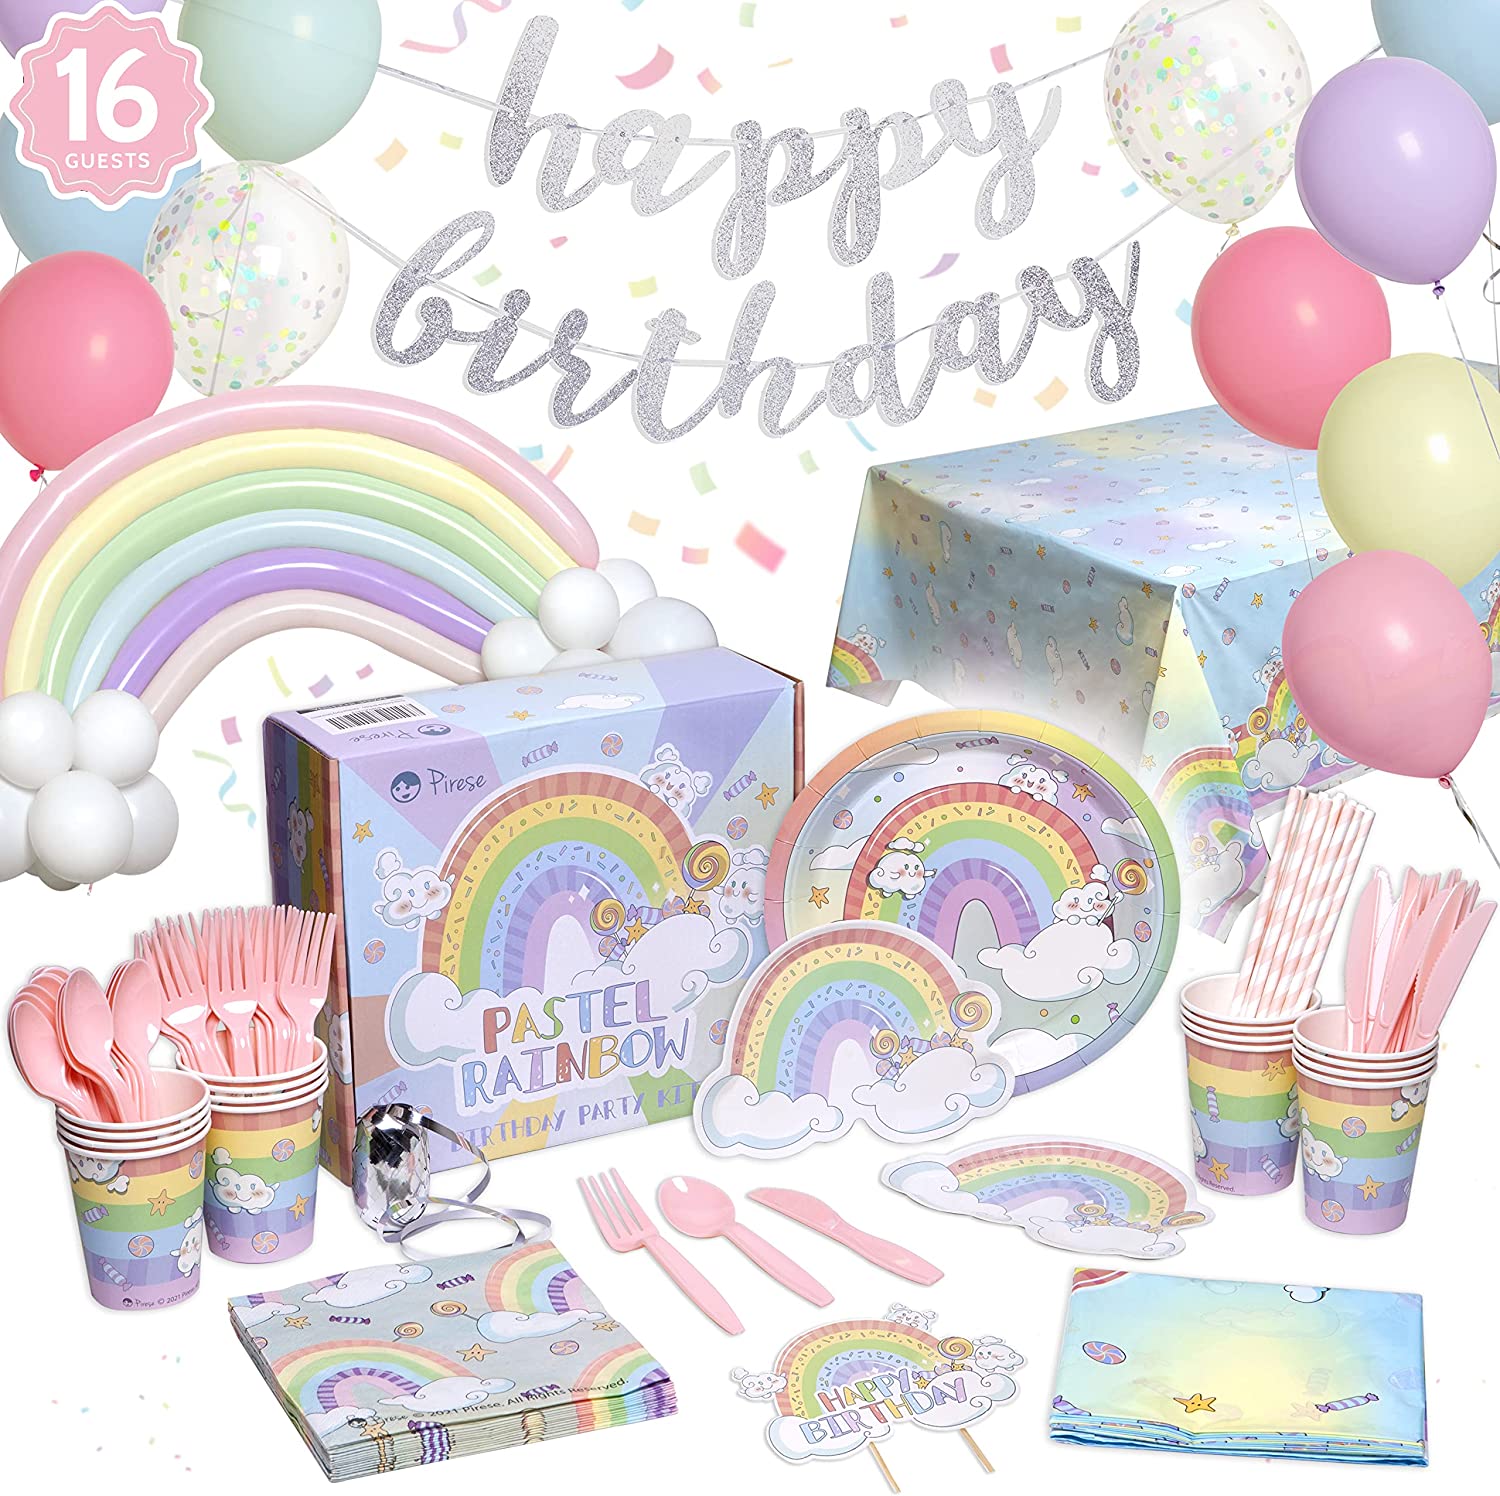 Unicorn Party Supplies Set - Rainbow Unicorn Party Decorations for Girls  Birthday Backdrop Balloons Tablecloth Ribbons Dinner Dessert Plates Cups